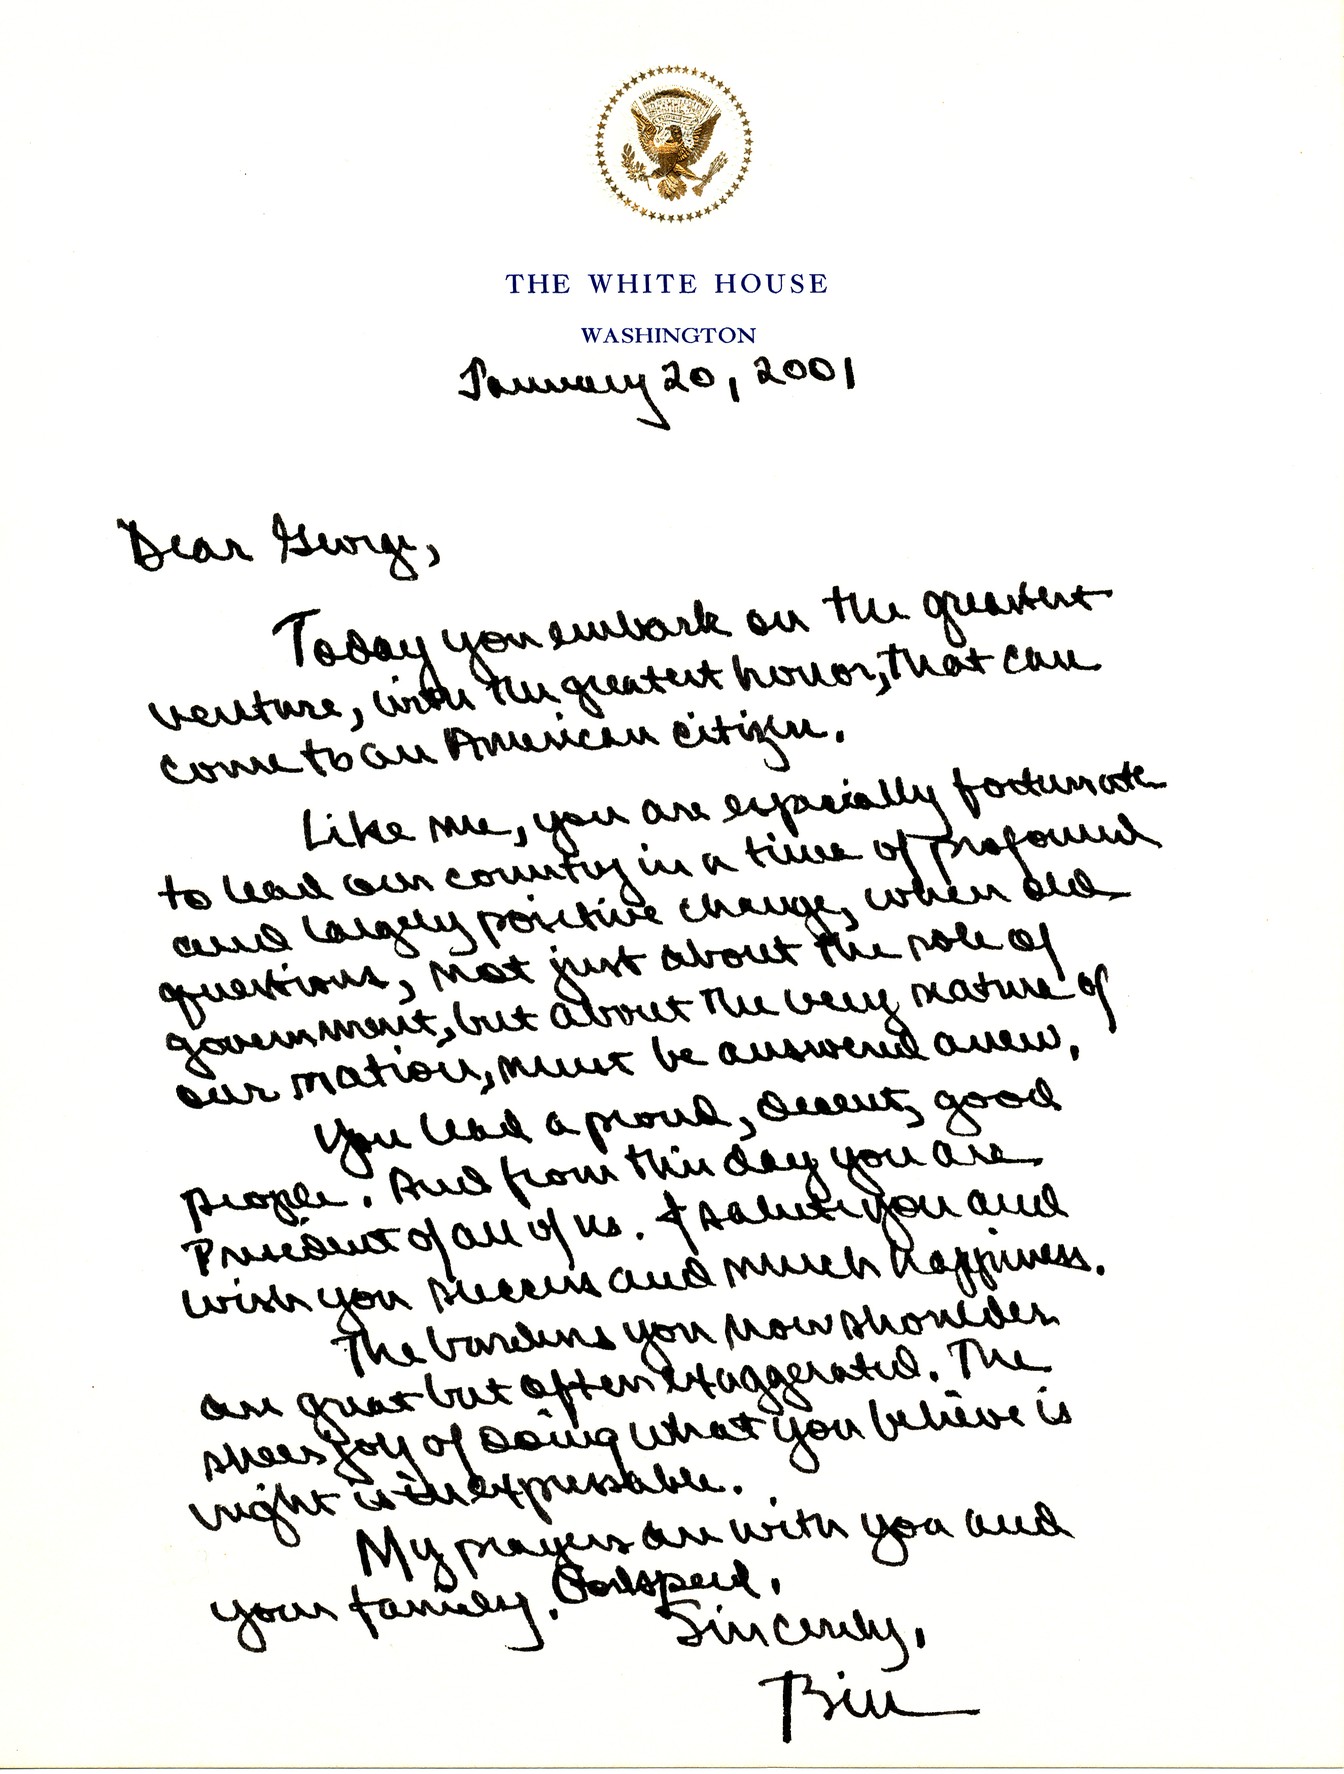 Will President Trump continue the tradition of the letter to the